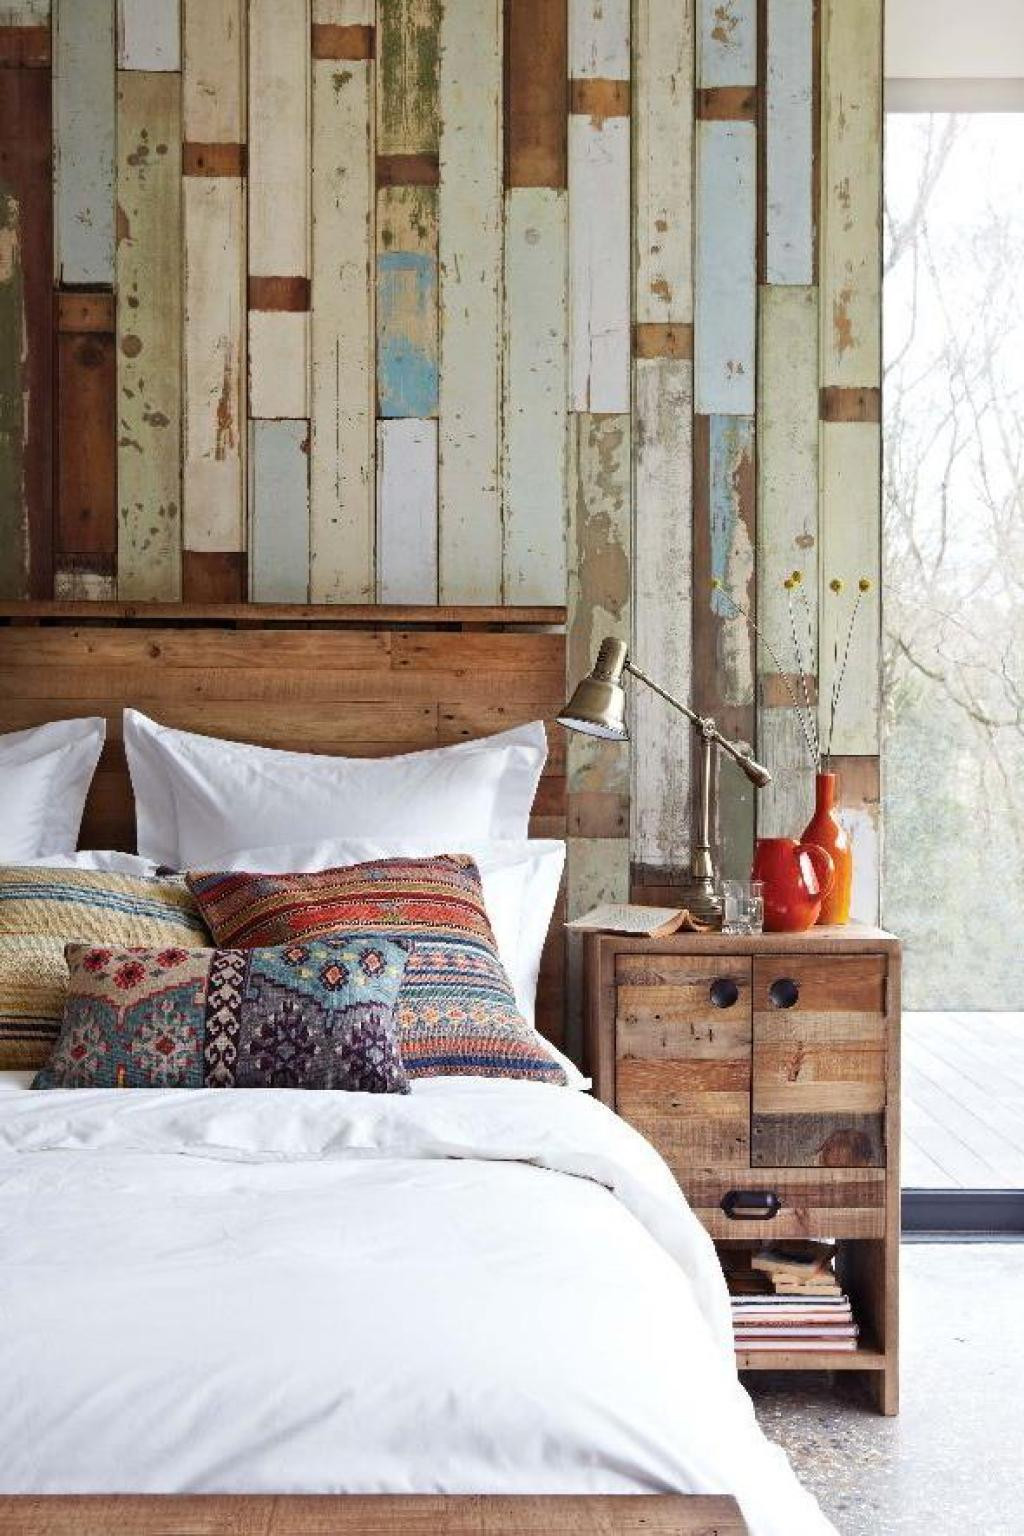 Rustic Bedroom Designs
 30 Rustic Bedroom Designs To Give Your Home Country Look